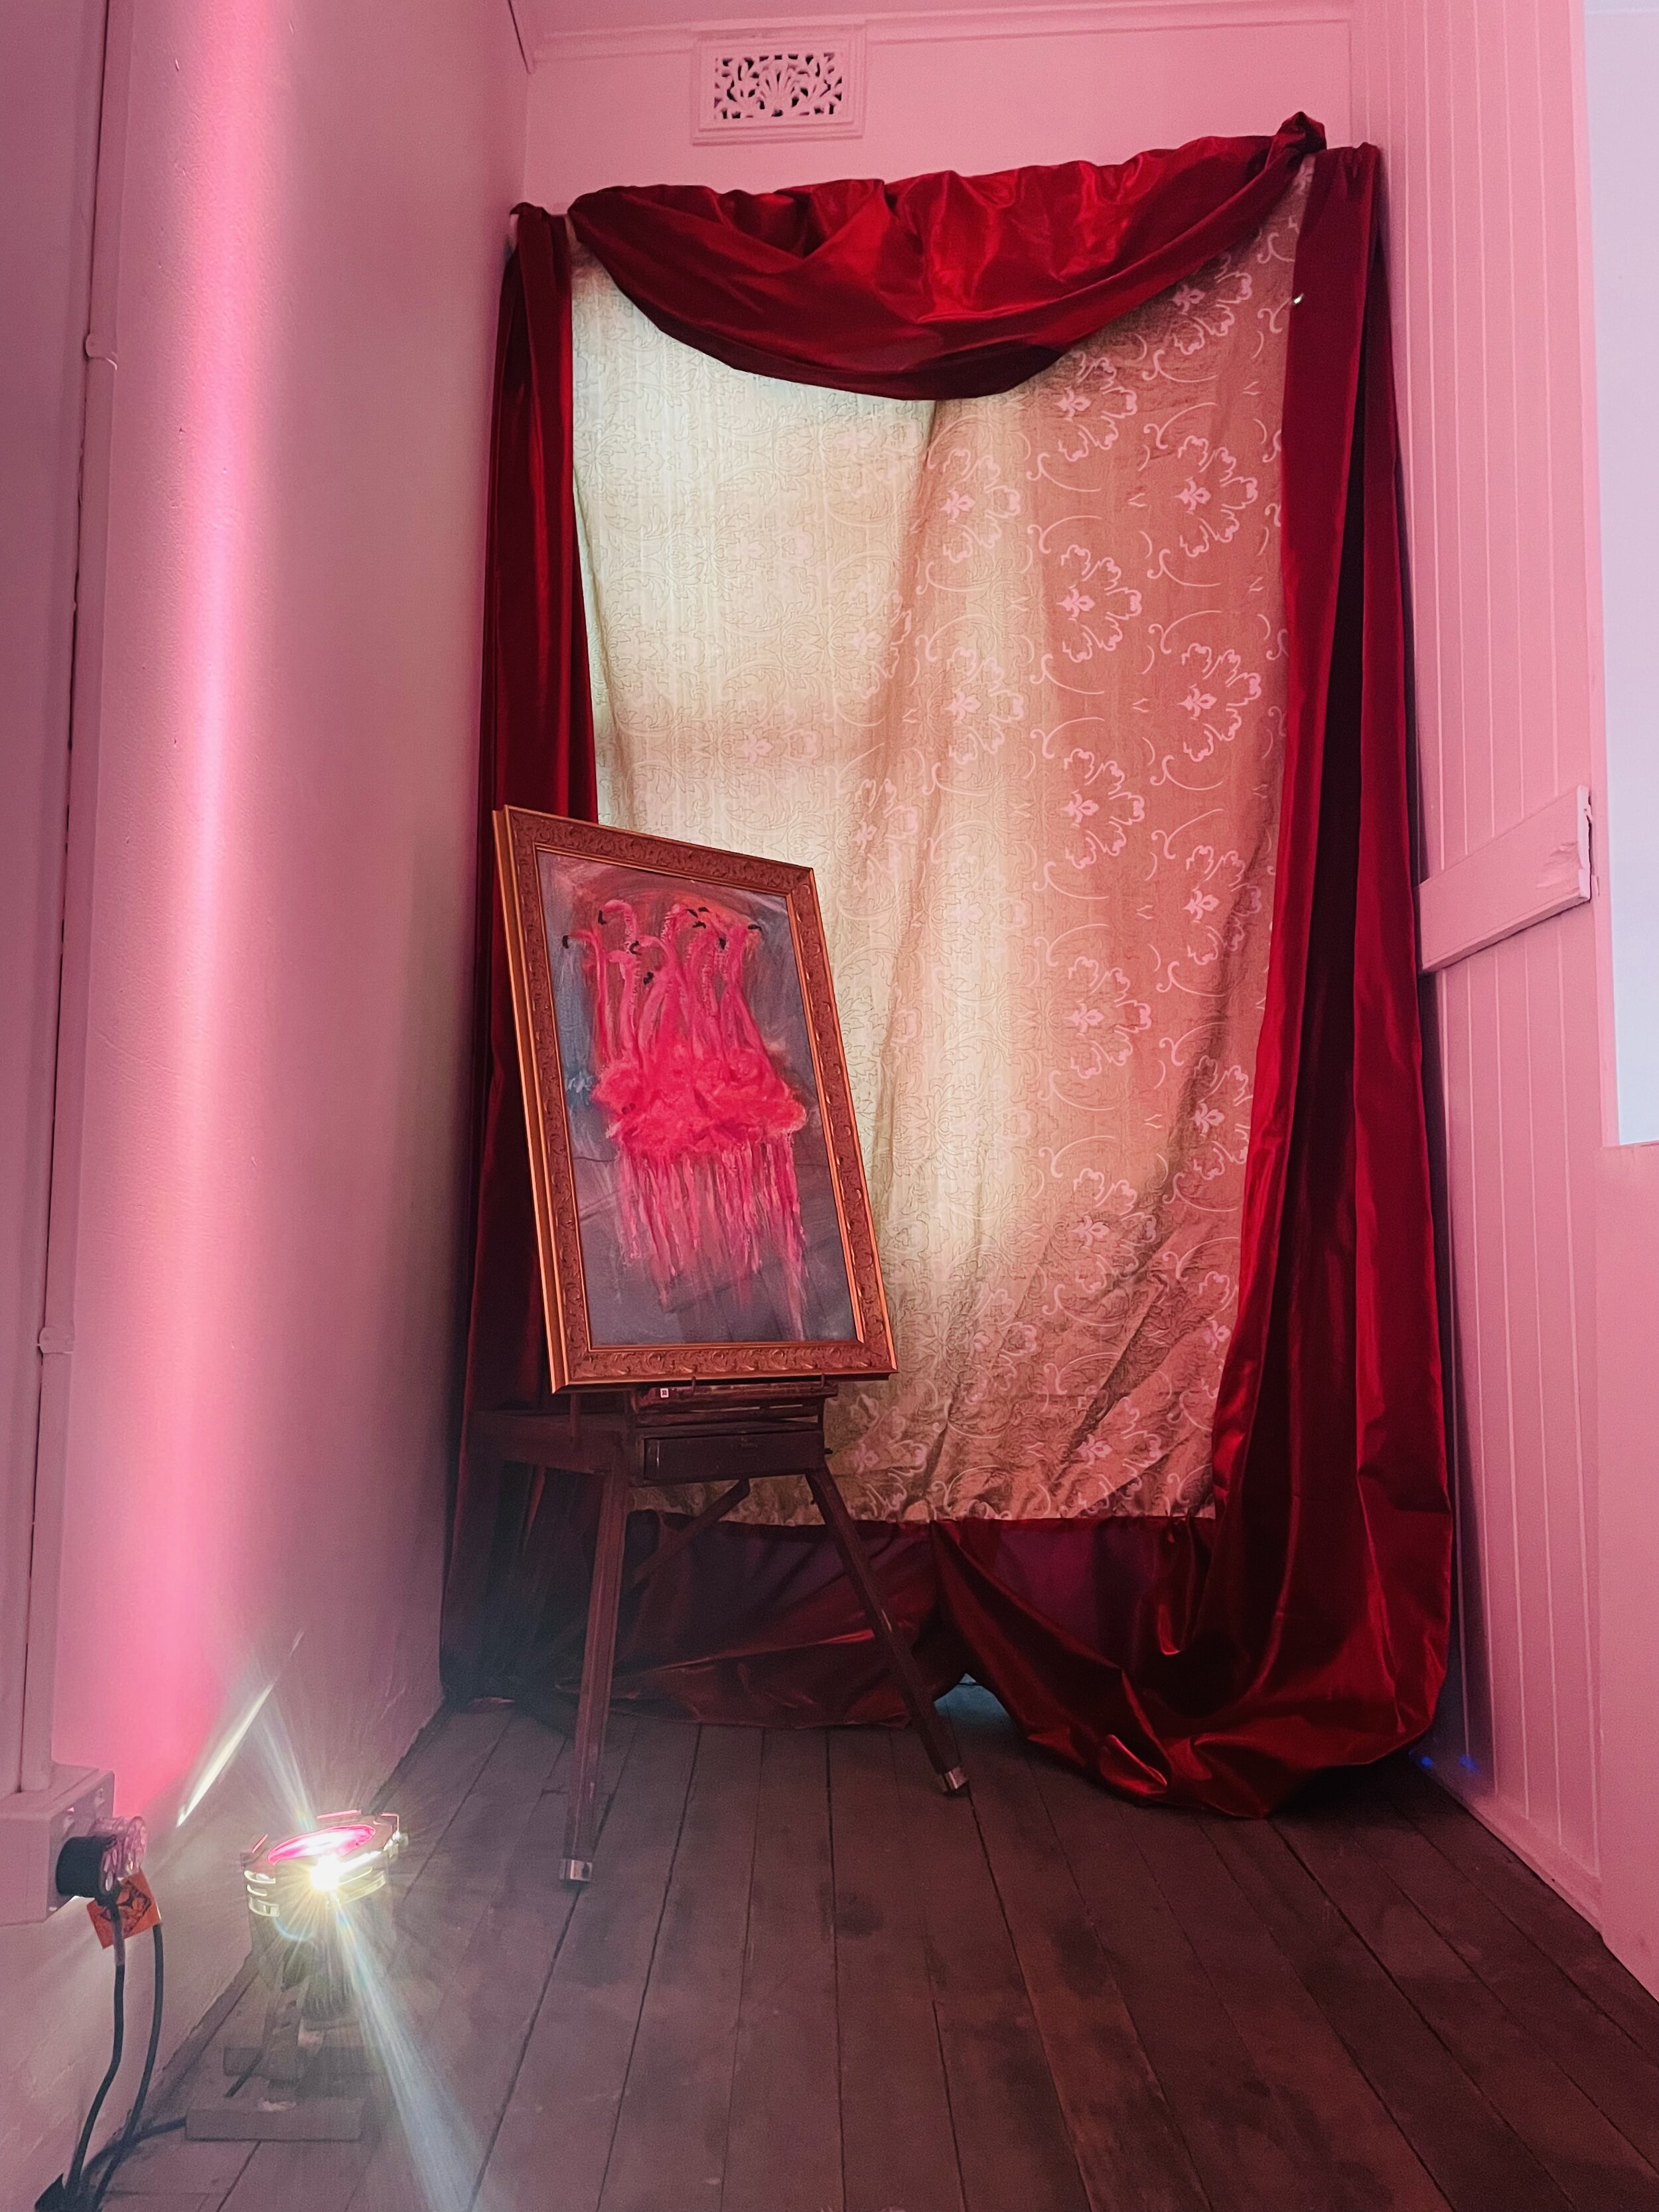   Eye See Pink, Black and White , exhibition installation view; courtesy the artist and Rogue Pop-up Gallery, Sydney; photo: Karen Brown 